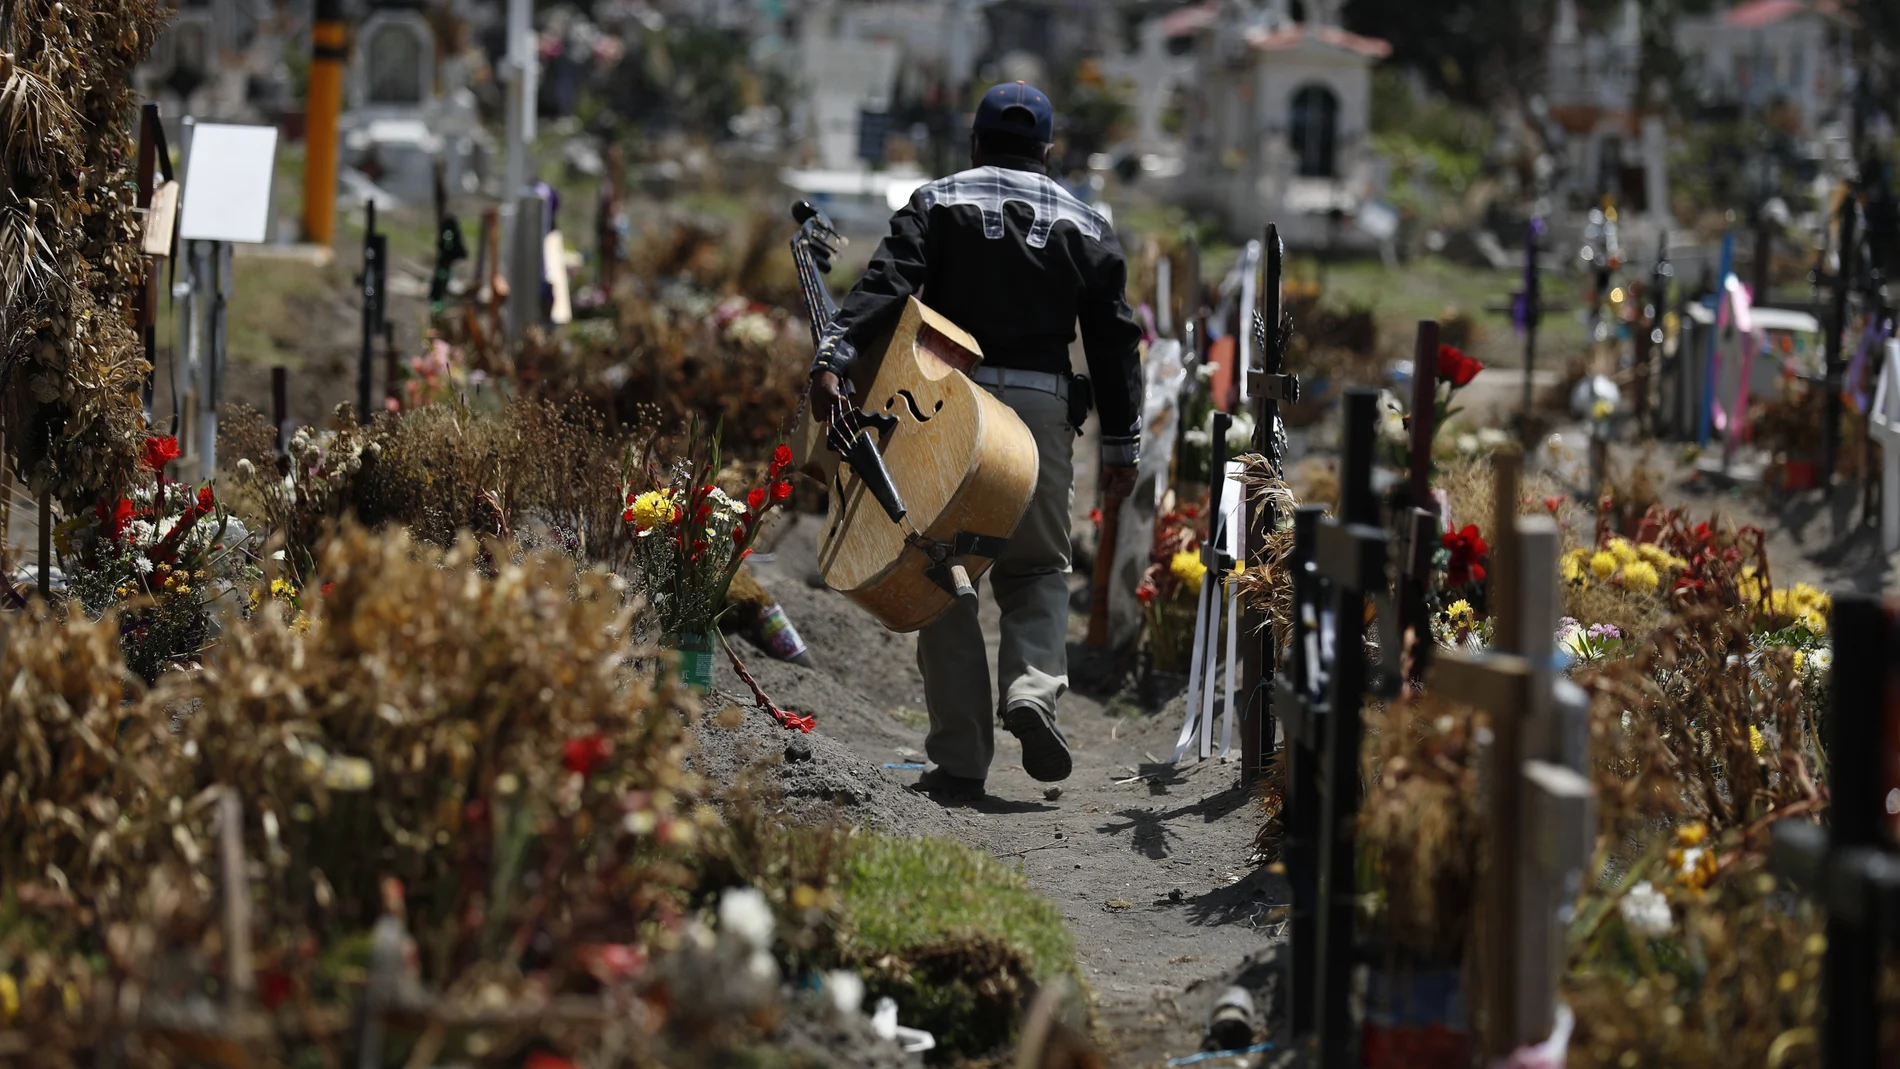 A musician walks between graves of people deceased in the last two months, in a section of the Municipal Cemetery of Valle de Chalco opened to accommodate the surge in deaths amid the ongoing coronavirus pandemic, on the outskirts of Mexico City, Thursday, July 2, 2020. (AP Photo/Rebecca Blackwell)